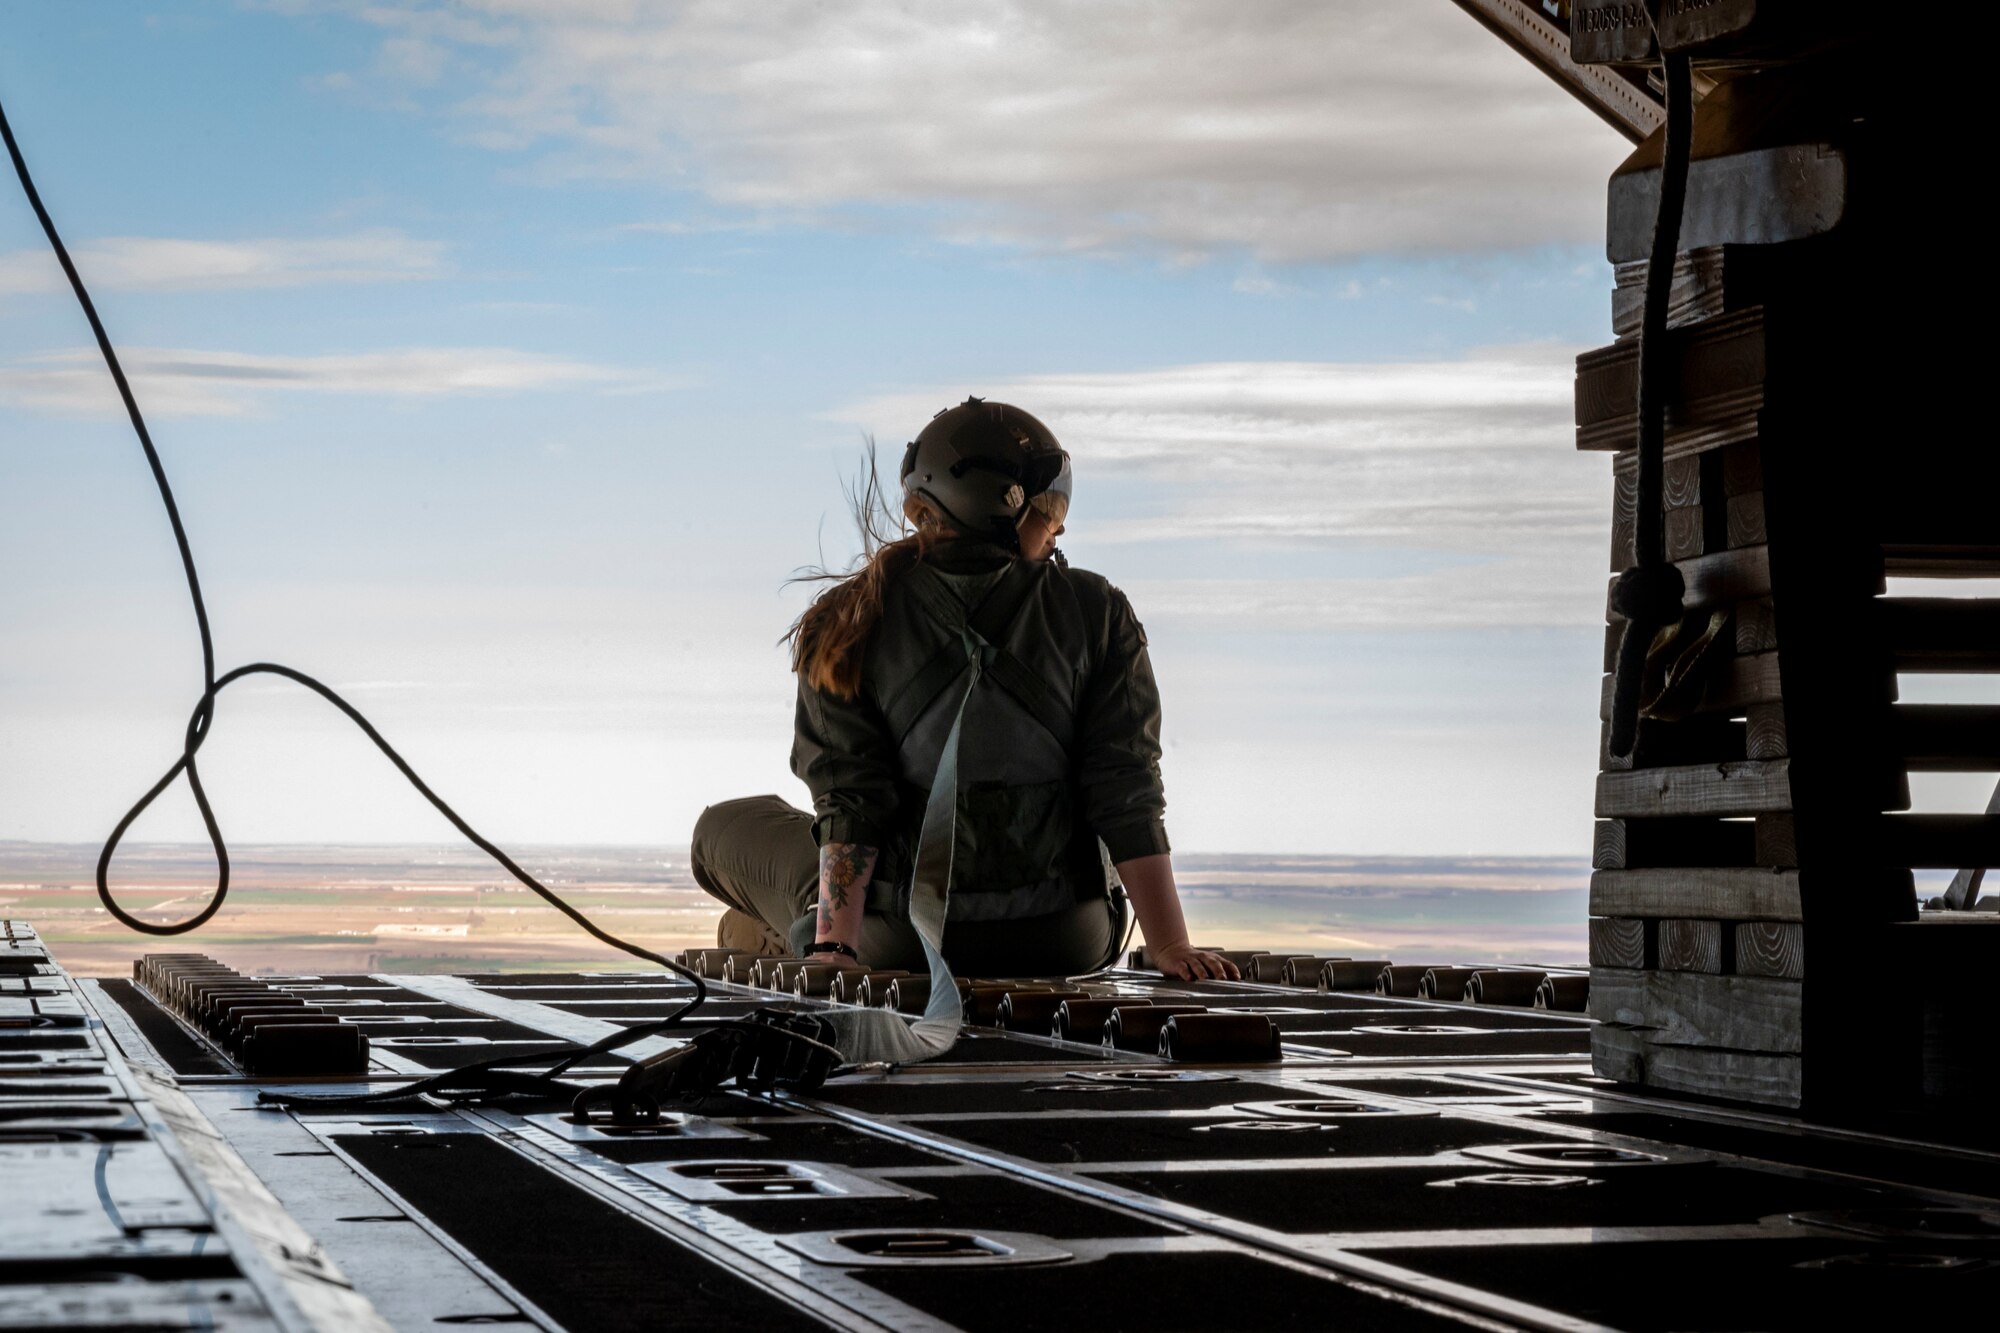 U.S. Air Force Staff Sgt. Kirby Graves, 40th Airlift Squadron loadmaster, sits on the edge of a C-130J Super Hercules during an Honorary Commander Induction tour incentive flight at Dyess Air Force Base, Texas, Jan. 20, 2023. The program also serves as a forum in which Dyess commanders can solicit advice and support from their civic leader counterparts on matters affecting military and civilian communities. Honorary commanders will be assigned to unit commanders serving in the 7th Bomb Wing, 317th Airlift Wing, 489th Bomb Group, 436th Training Squadron, 337th Test Evaluation Squadron, 77th Weapons Squadron and Det. 1 U.S. Marine Corps. (U.S. Air Force photo by Senior Airman Leon Redfern)